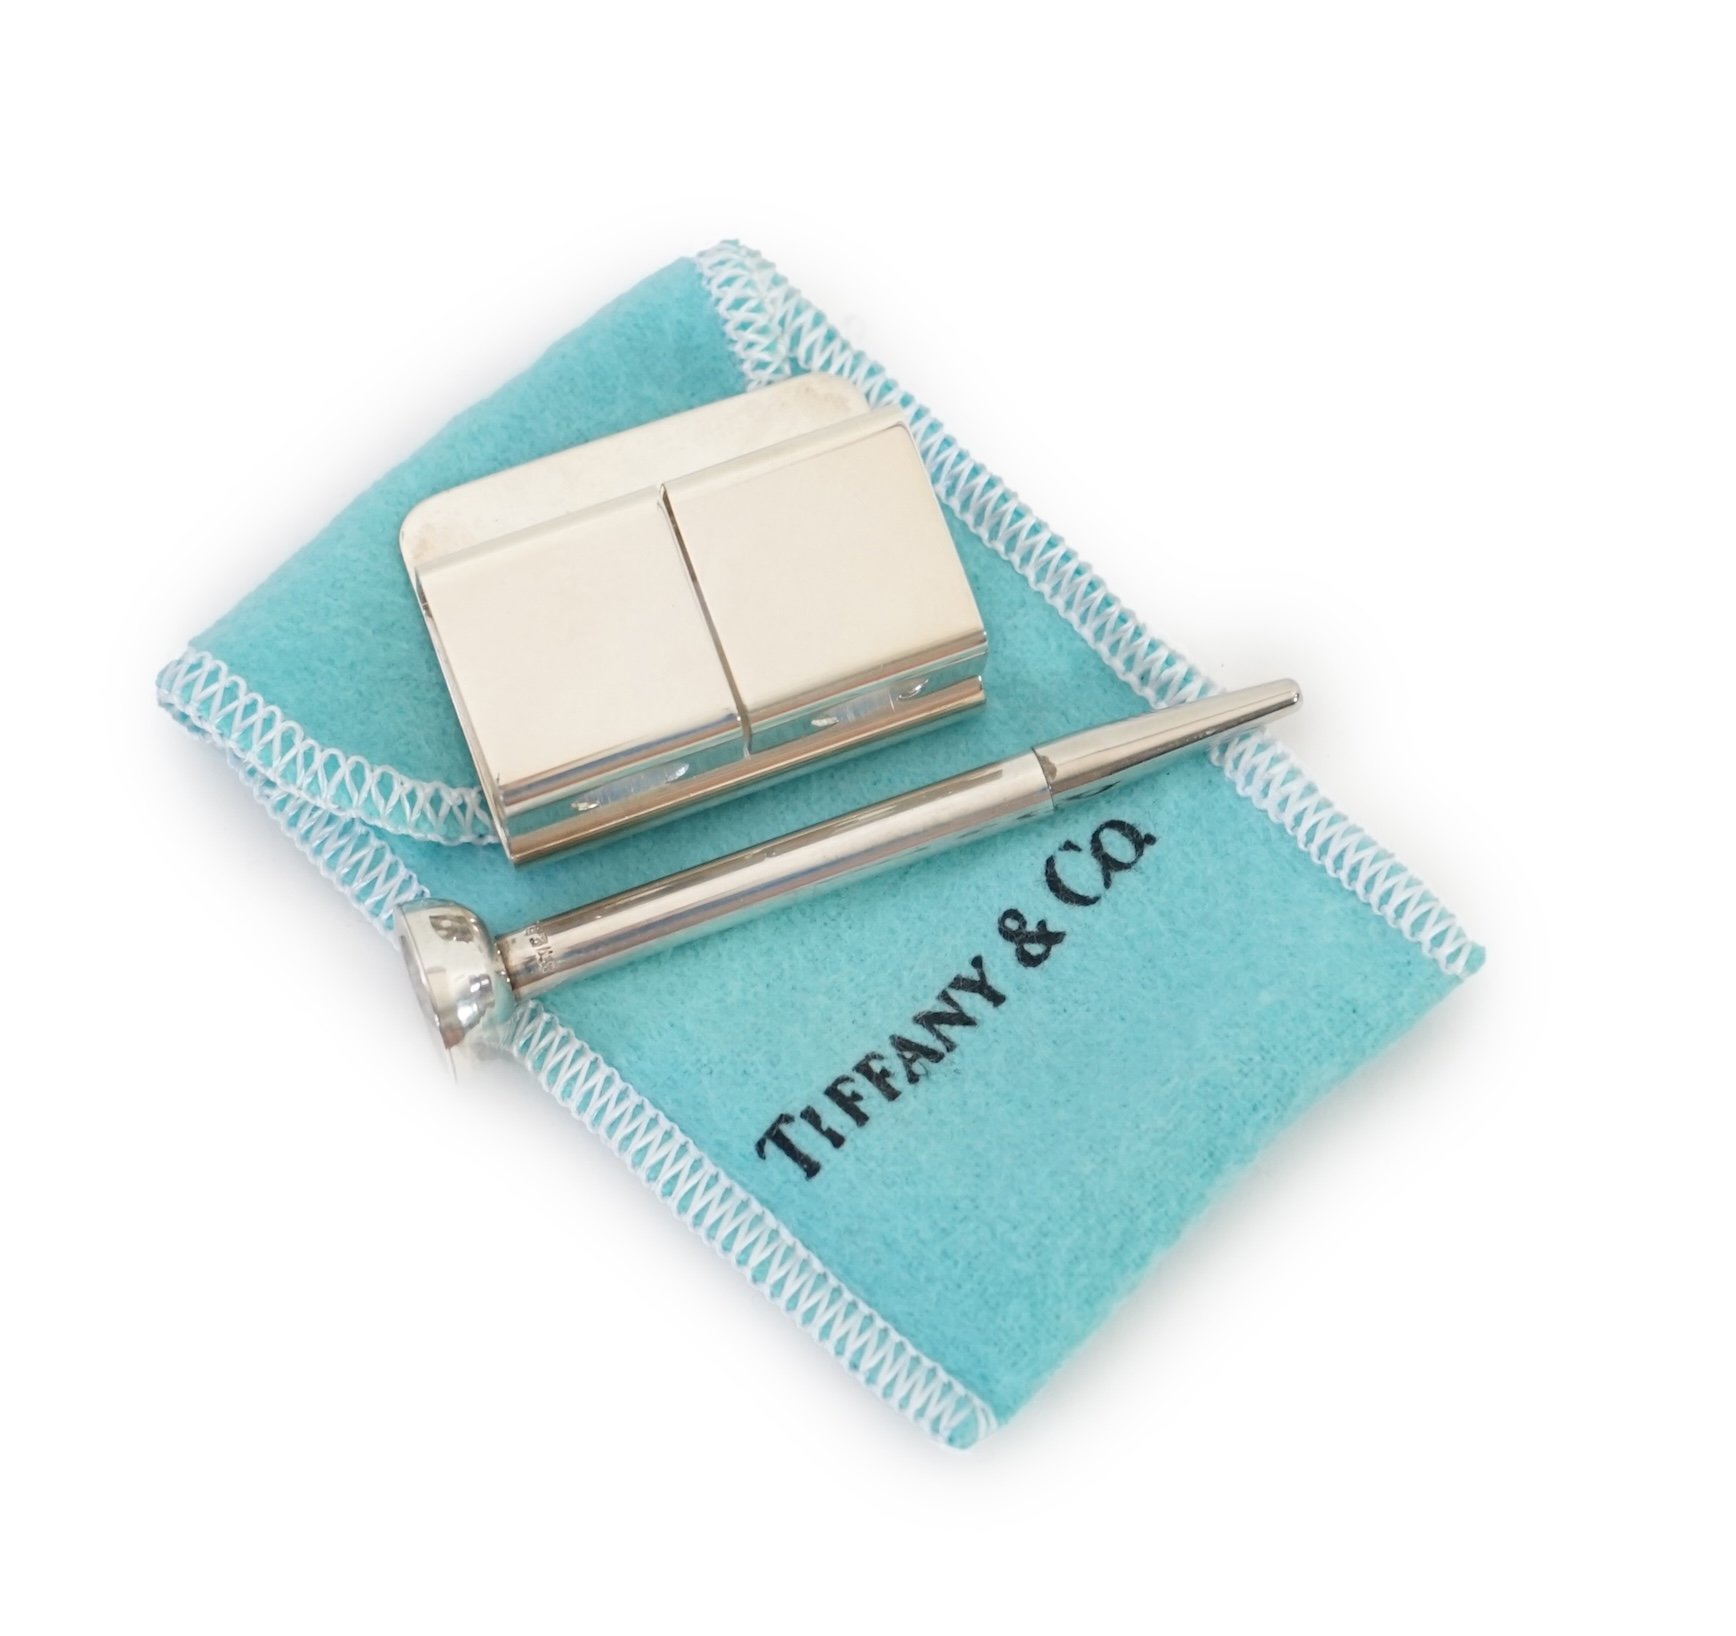 A Tiffany & Co. golf tee holder and pencil